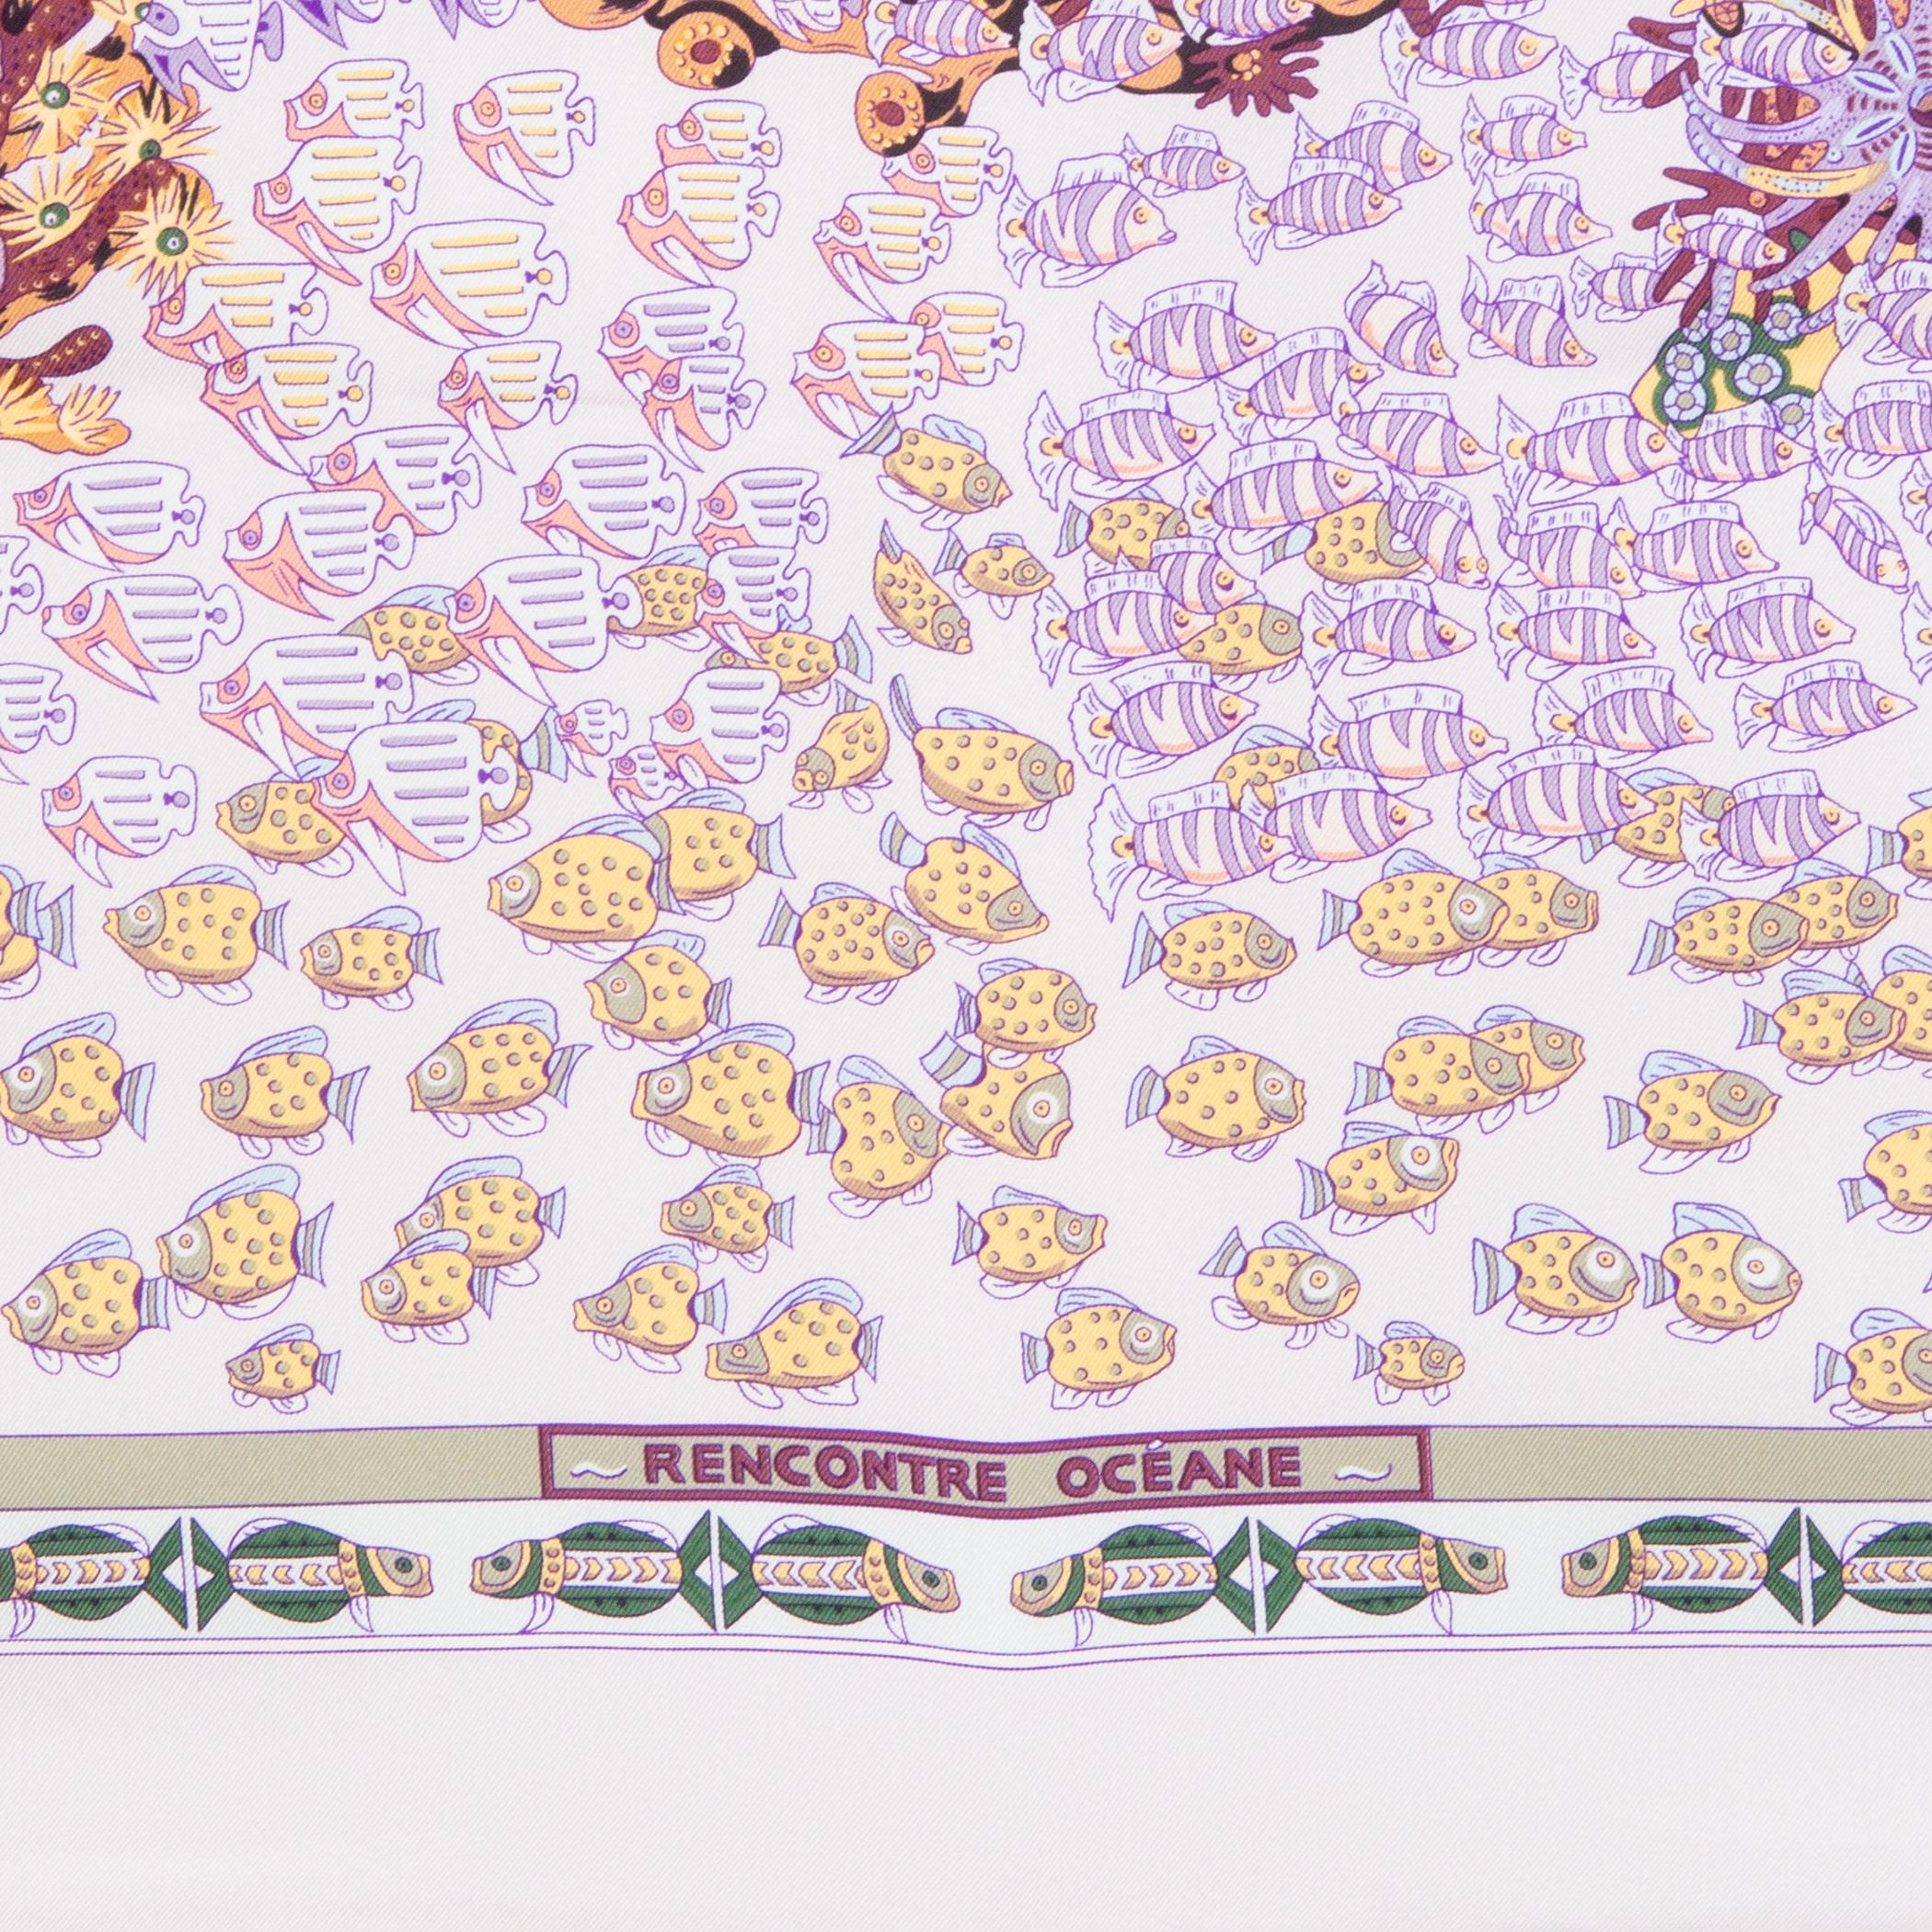 Hermes 'Rencontre Ocean 90' scarf by Annie Faivre in lilac silk twill (100%) with pale grey border and off-white hem. Details in purple, yellow, pink and green. Has been worn with one small stain on the border - mentioned for accurancy only. Overall